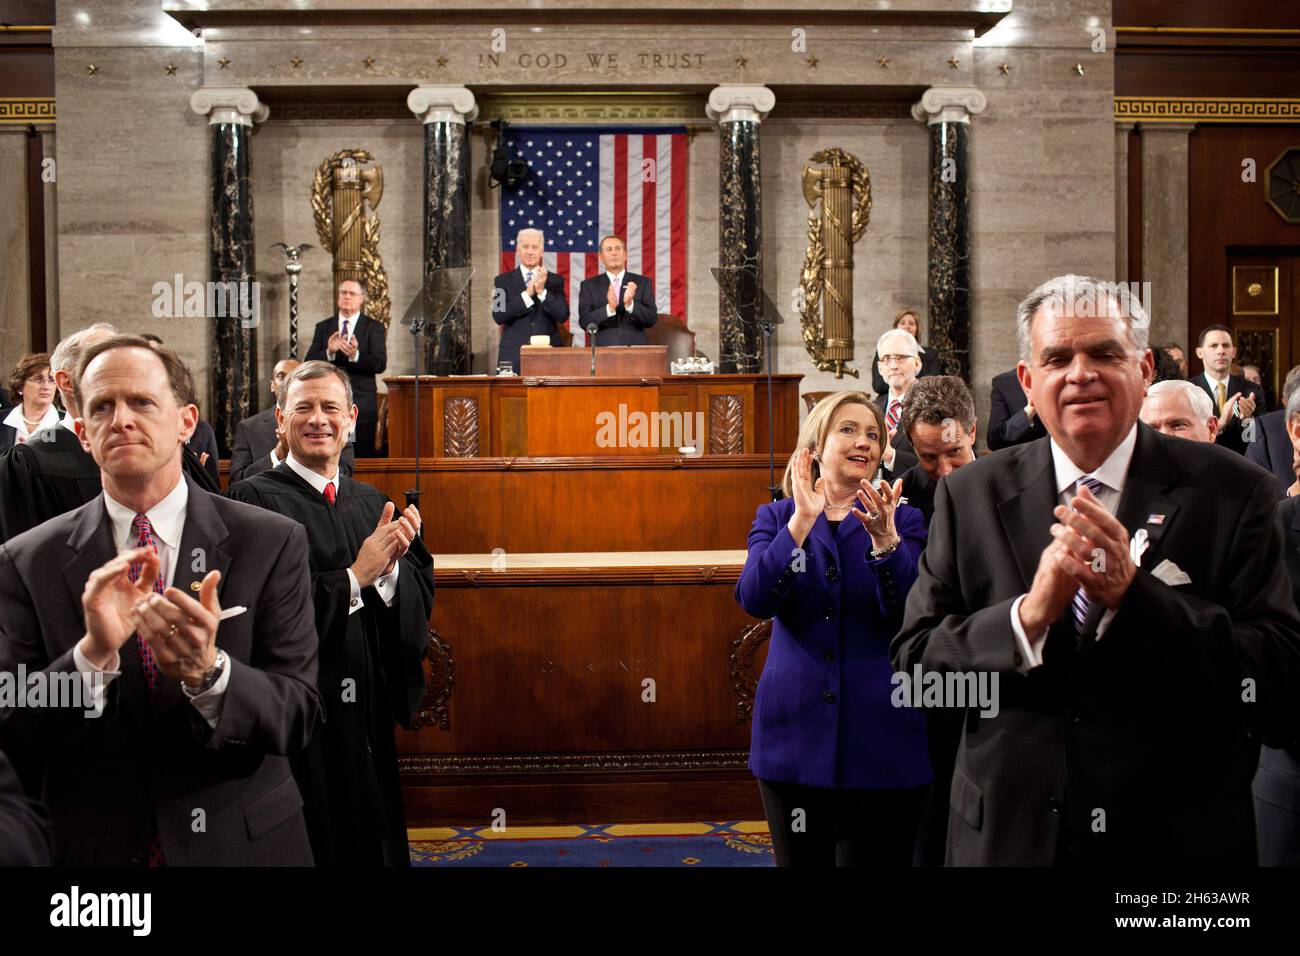 From left: Sen. Patrick Toomey, R-Pa., Supreme Court Chief Justice John Roberts, Secretary of State Hillary Rodham Clinton, Treasury Secretary Timothy Geithner, and Transportation Secretary Ray LaHood applaud as President Barack Obama enters the House Chamber to deliver his State of the Union address at the U.S. Capitol in Washington, D.C., Jan. 25, 2011. Stock Photo